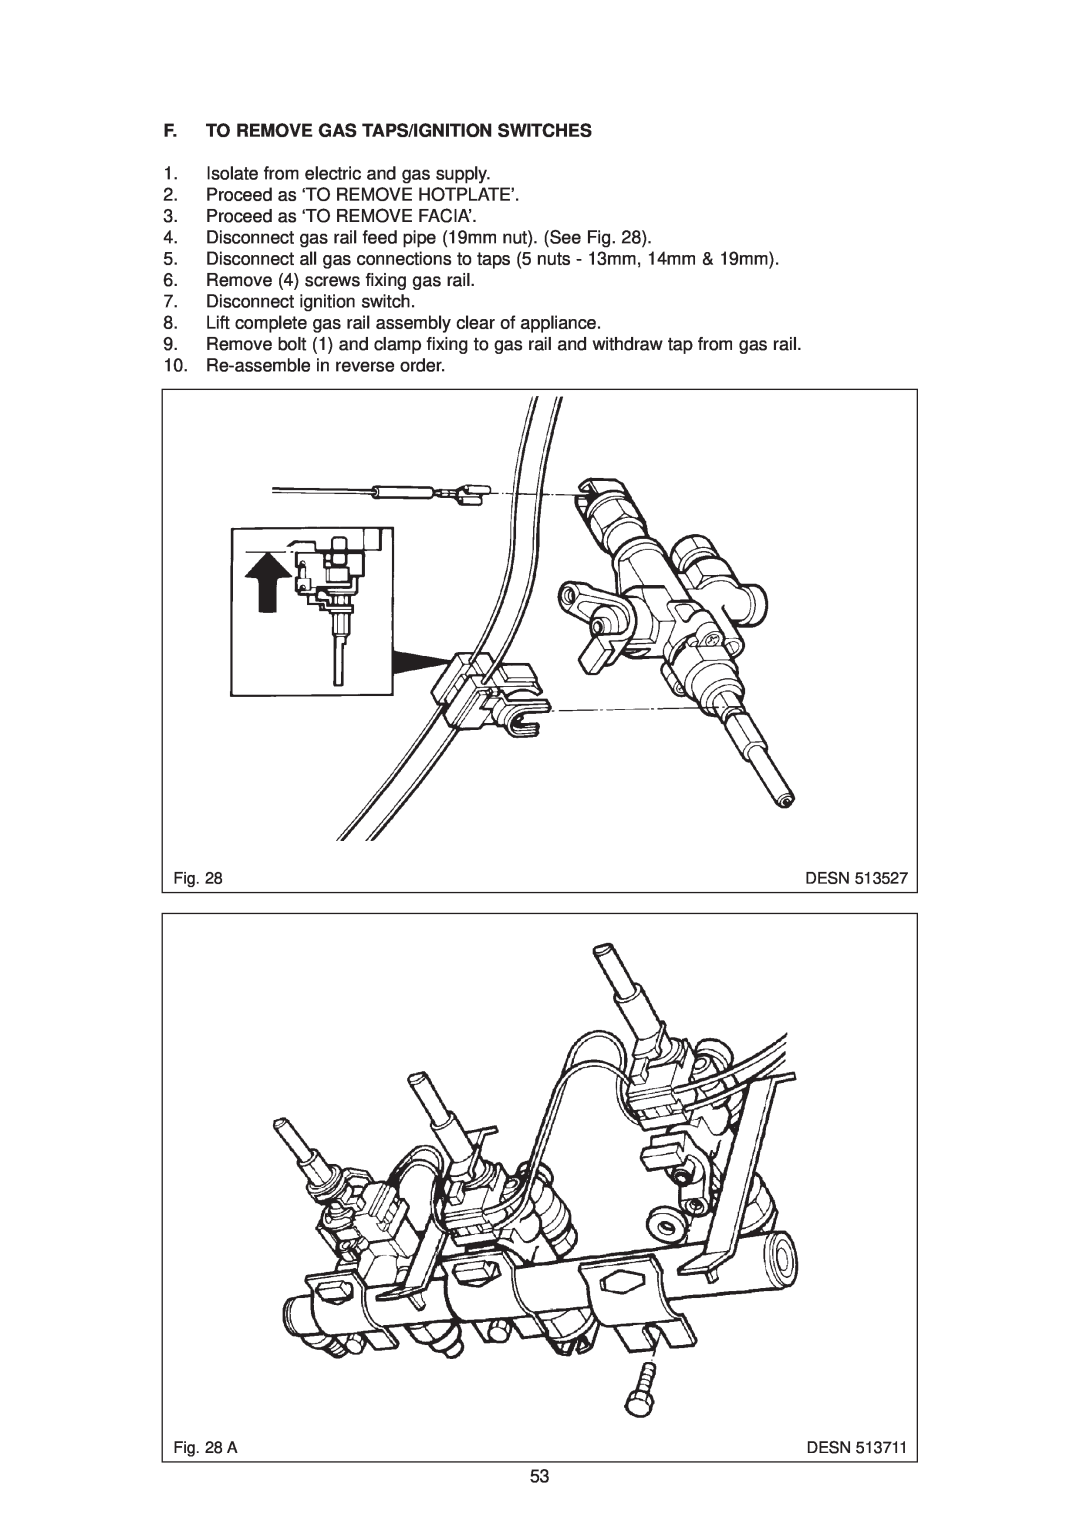 Aga Ranges dc6 owner manual F. To Remove Gas Taps/Ignition Switches 